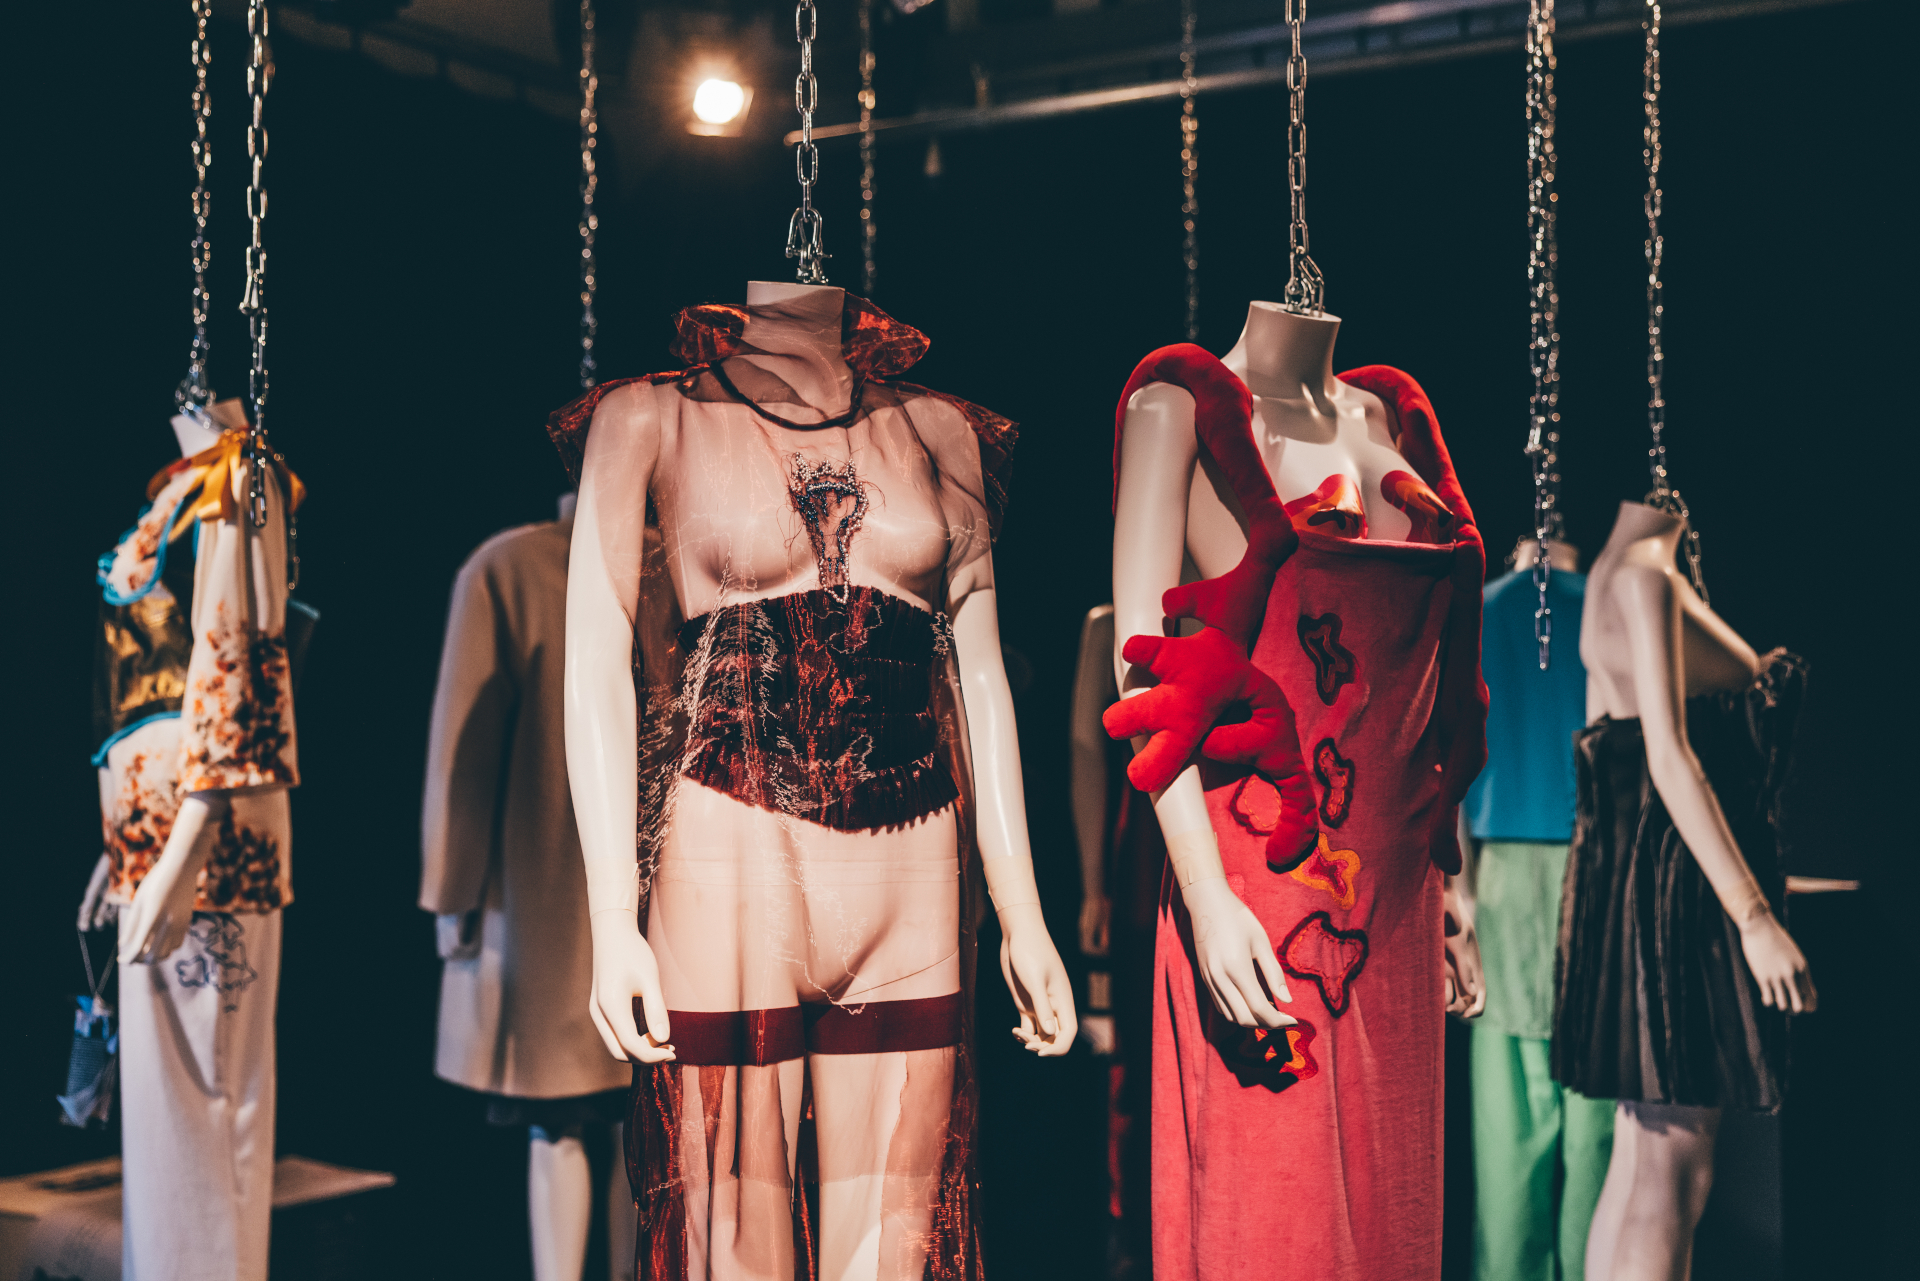 Headless mannequins wearing clothes designs hanging from ceiling